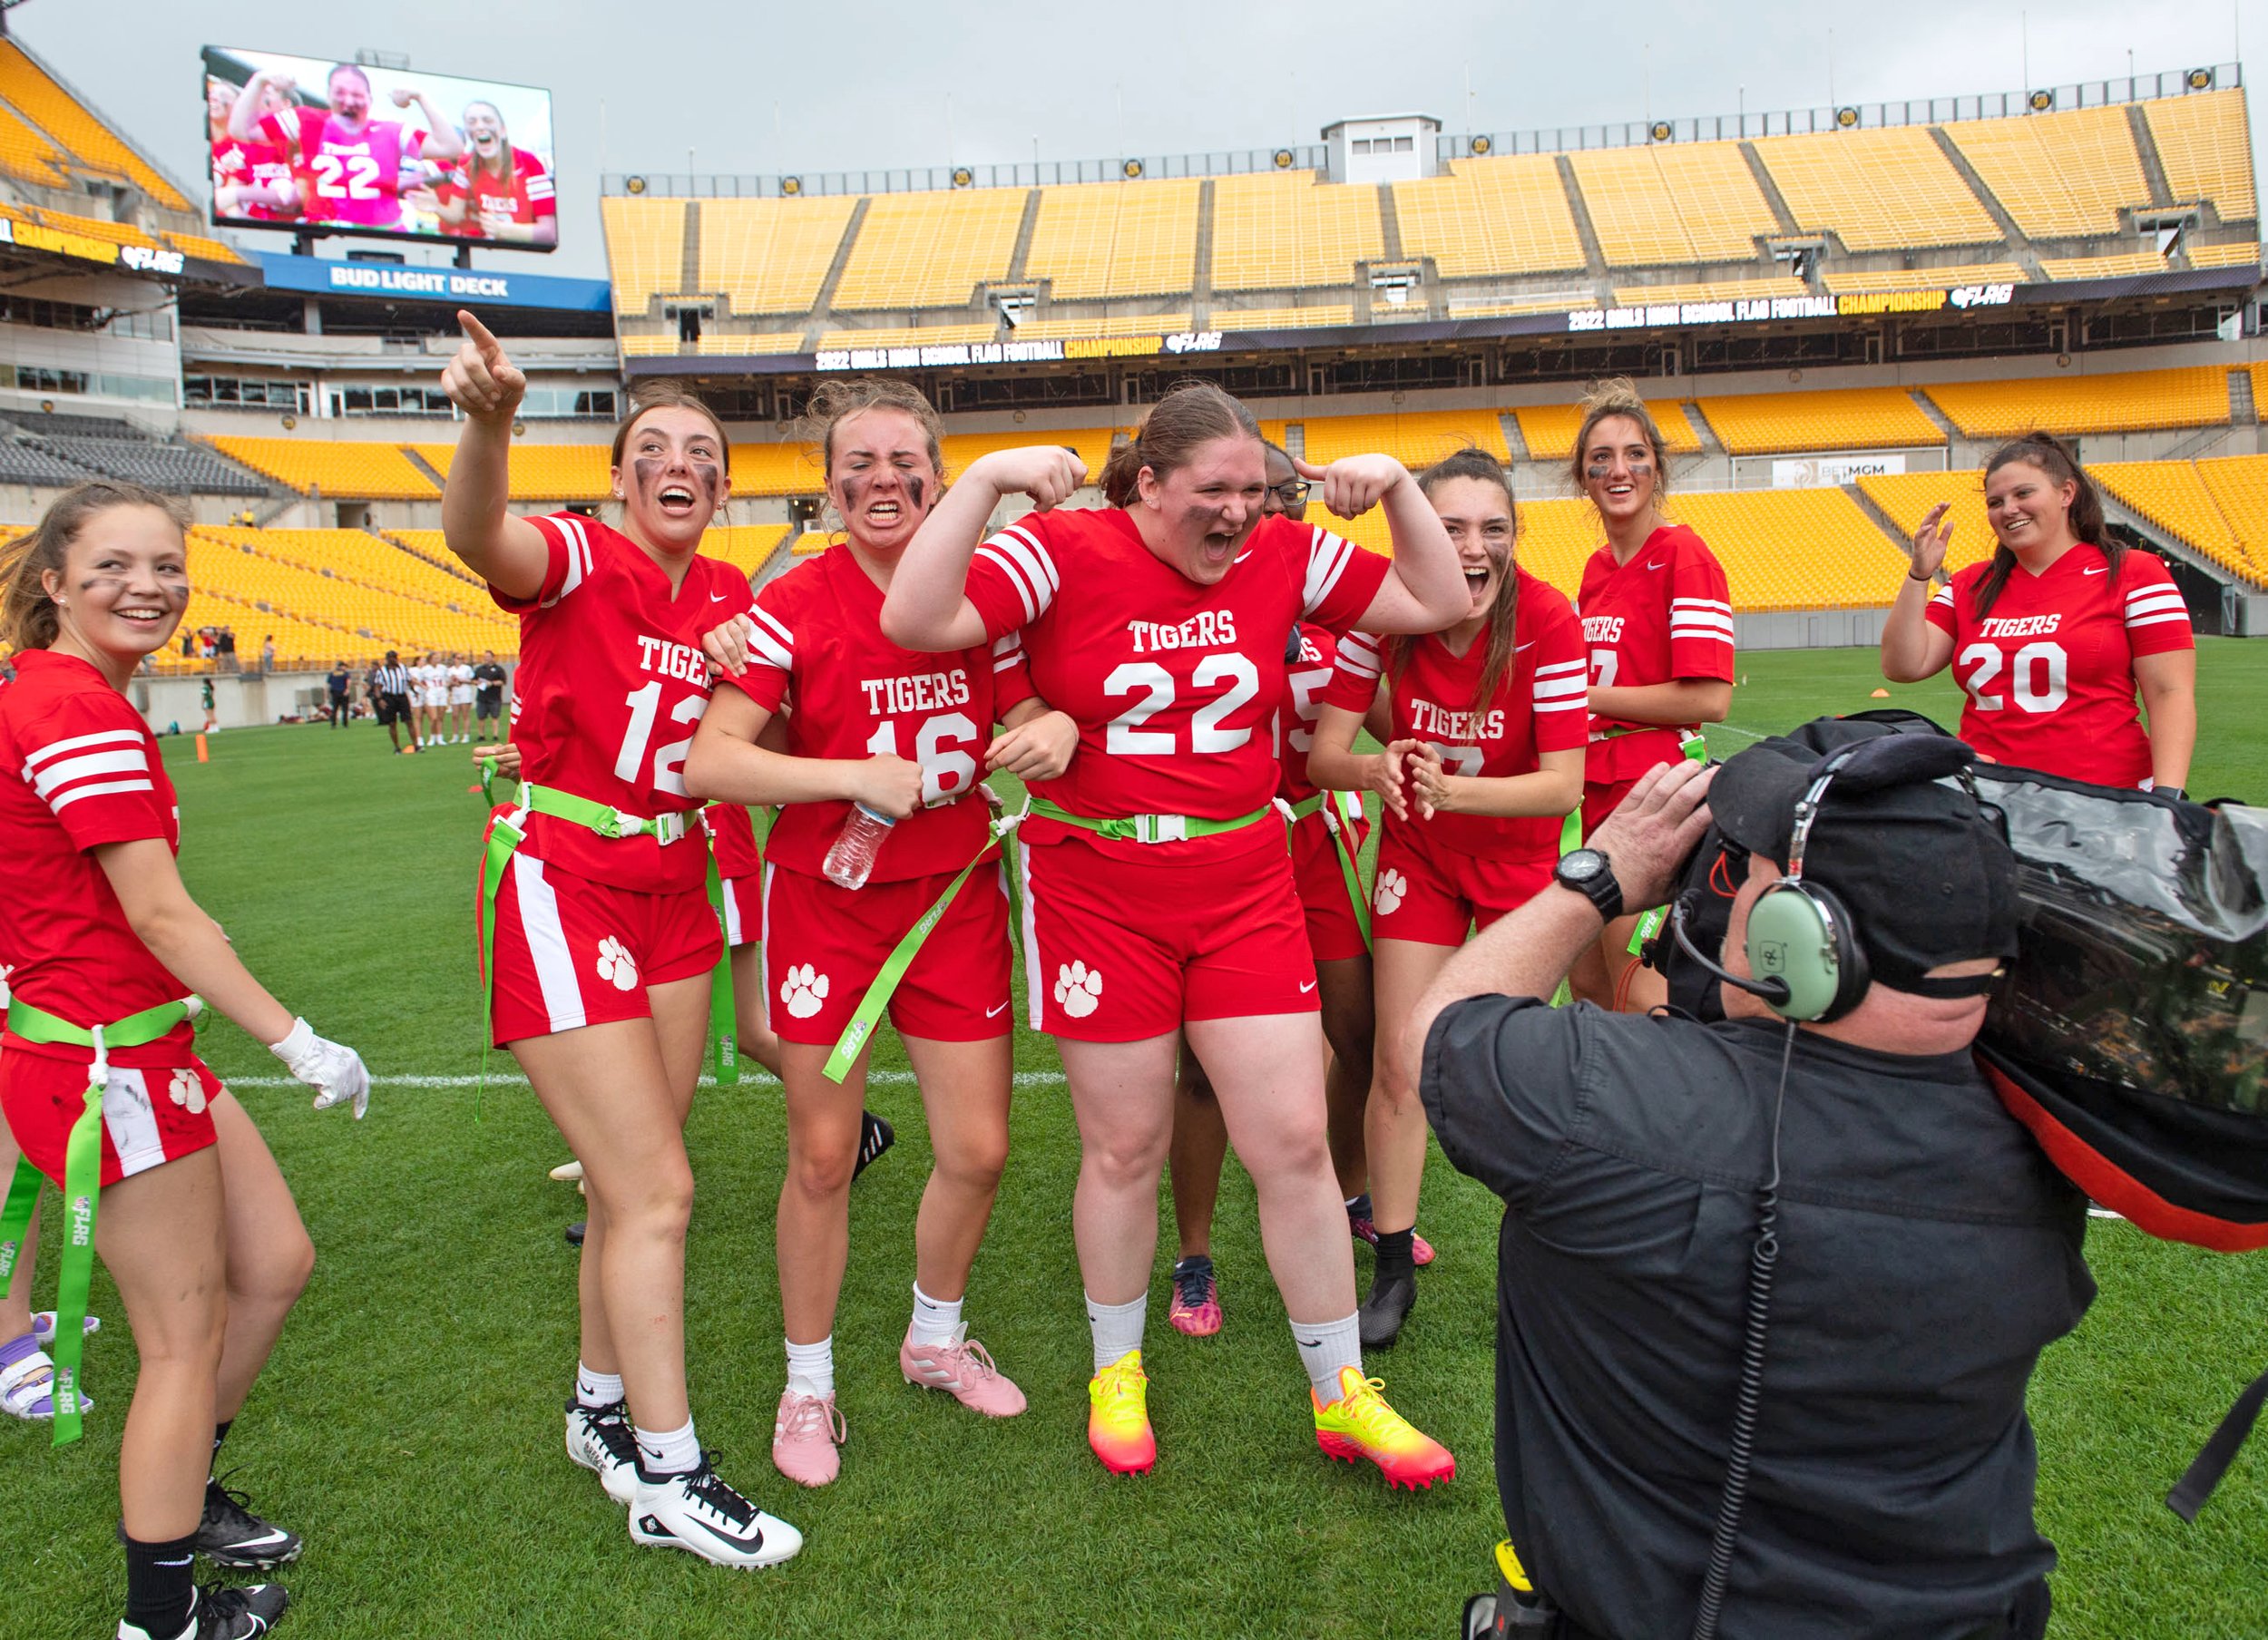  Moon's flag football players react to the camera during the championship game against Shaler on Sunday, May 22, 2022, at Heinz Field on the North Shore. (Emily Matthews/Post-Gazette)  